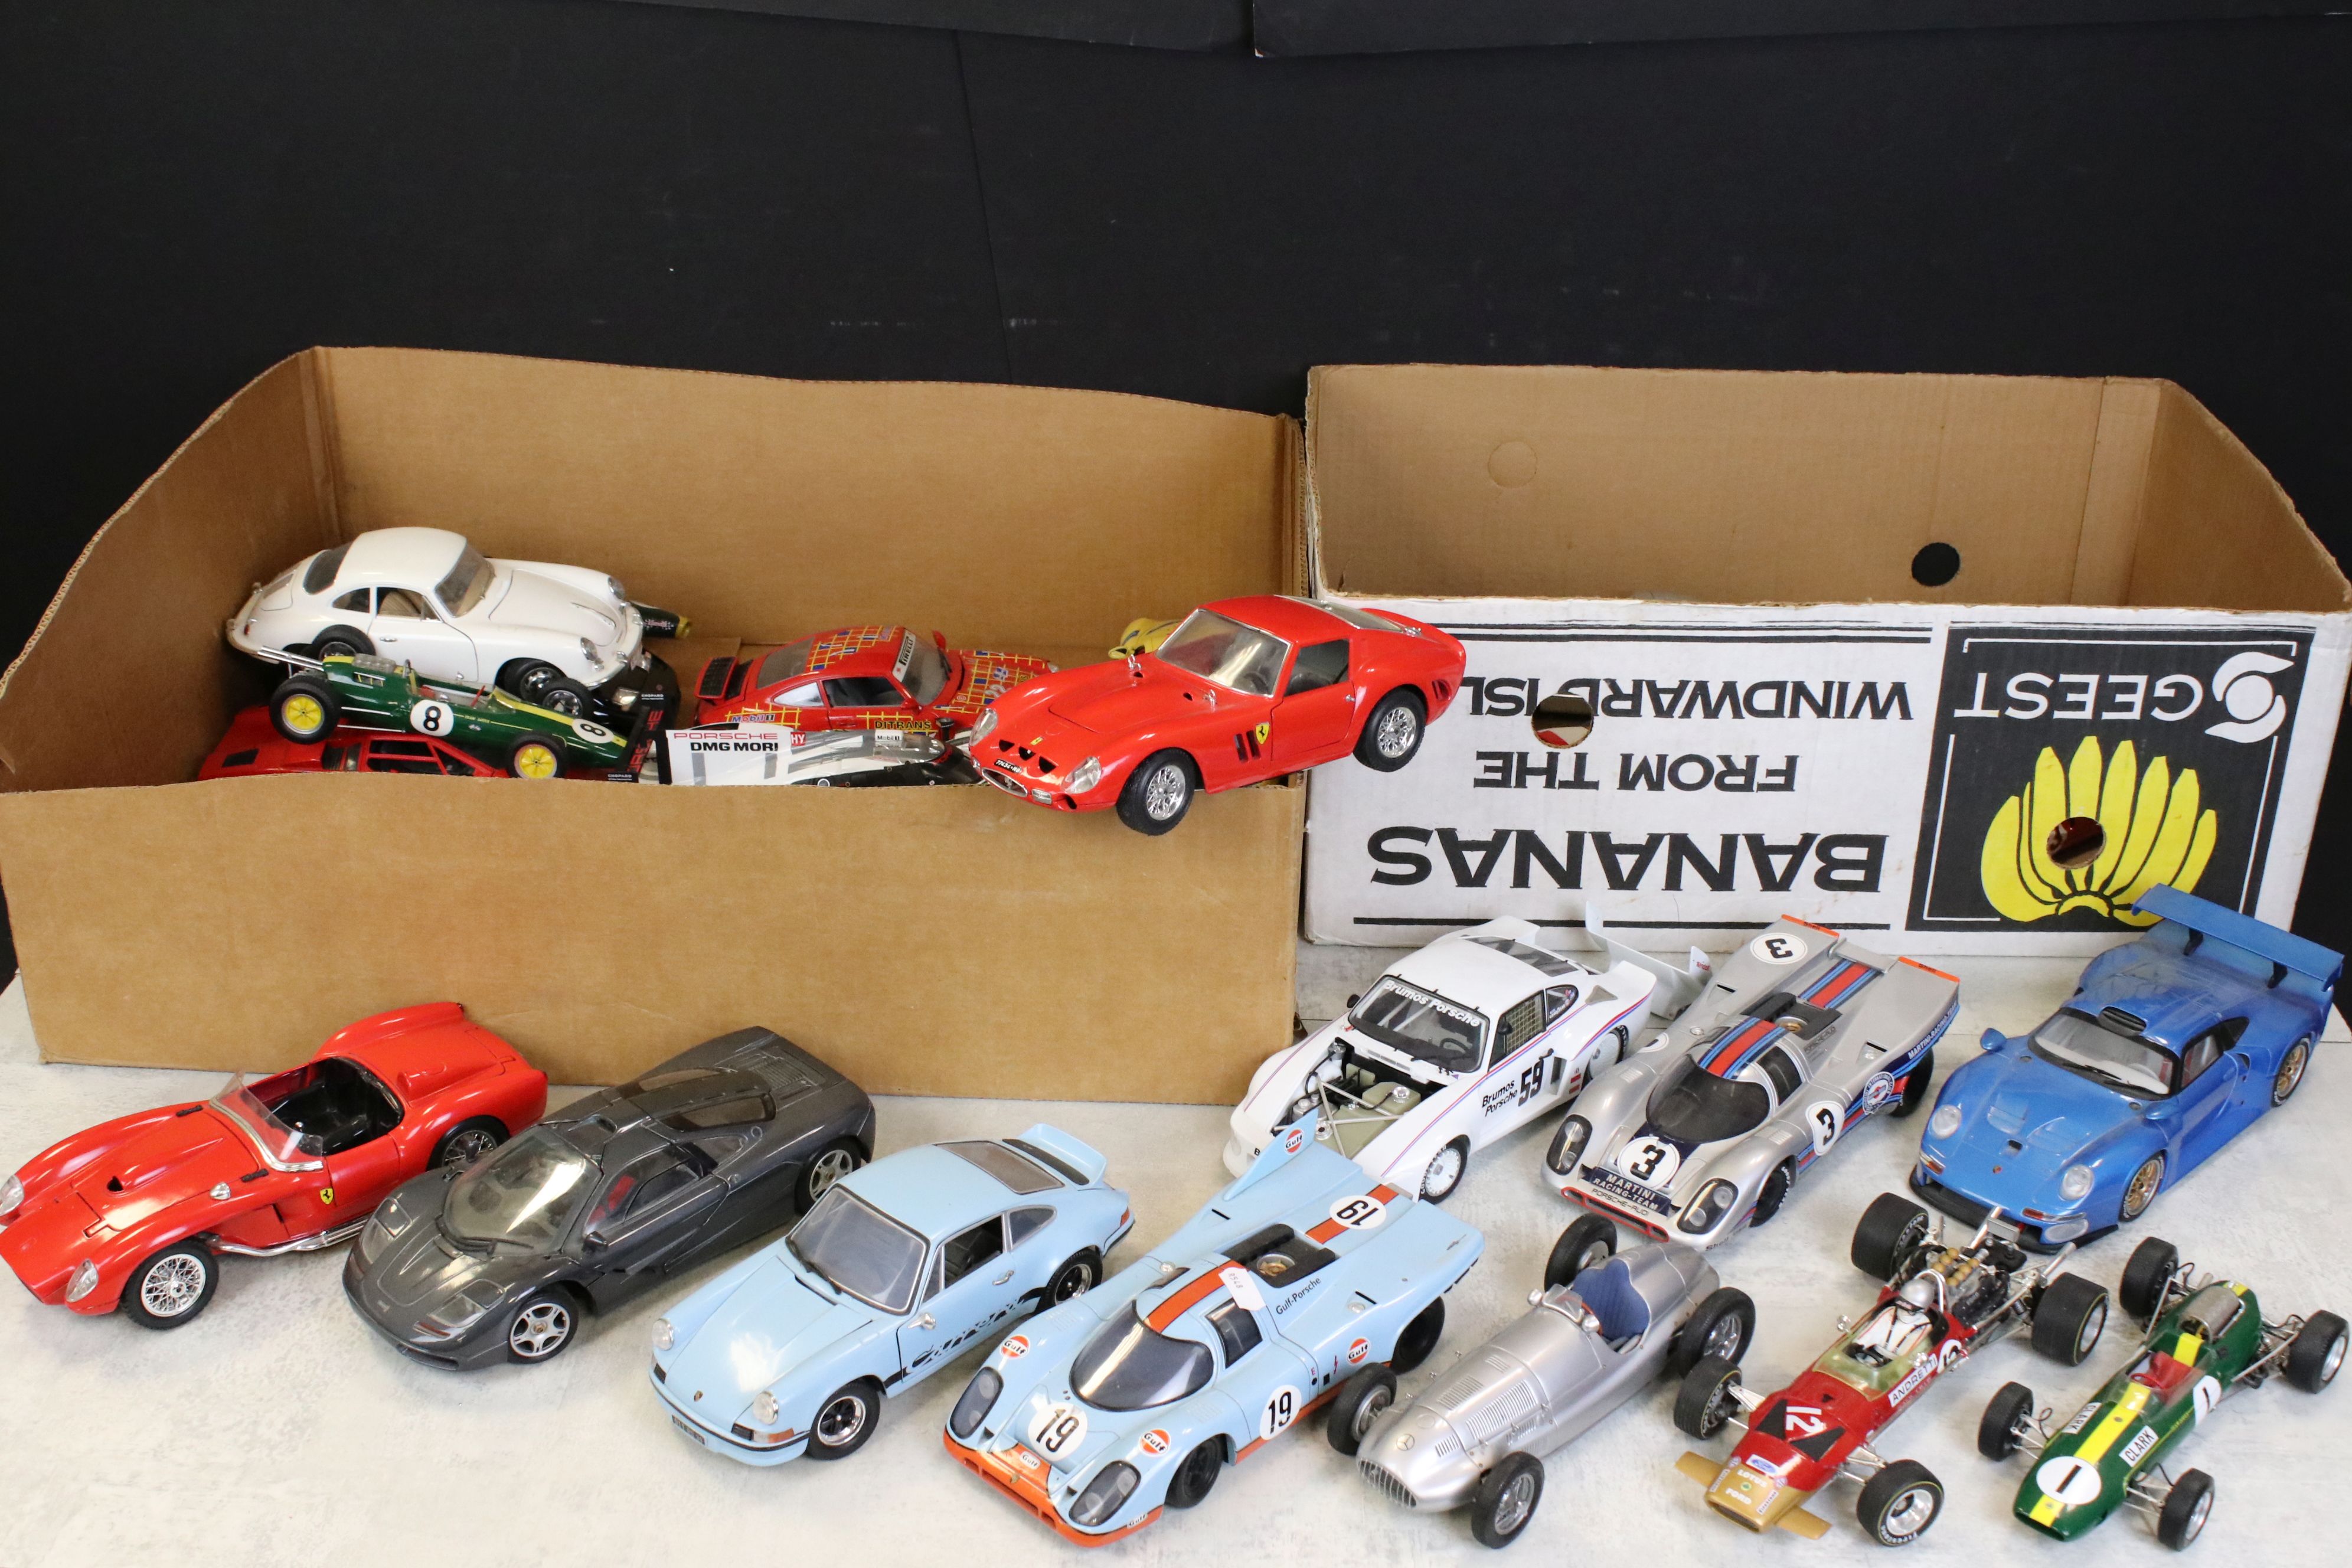 29 diecast racing car models, 1/18 scale or similar, to include Burago, Maisto, Universal Hobbies,